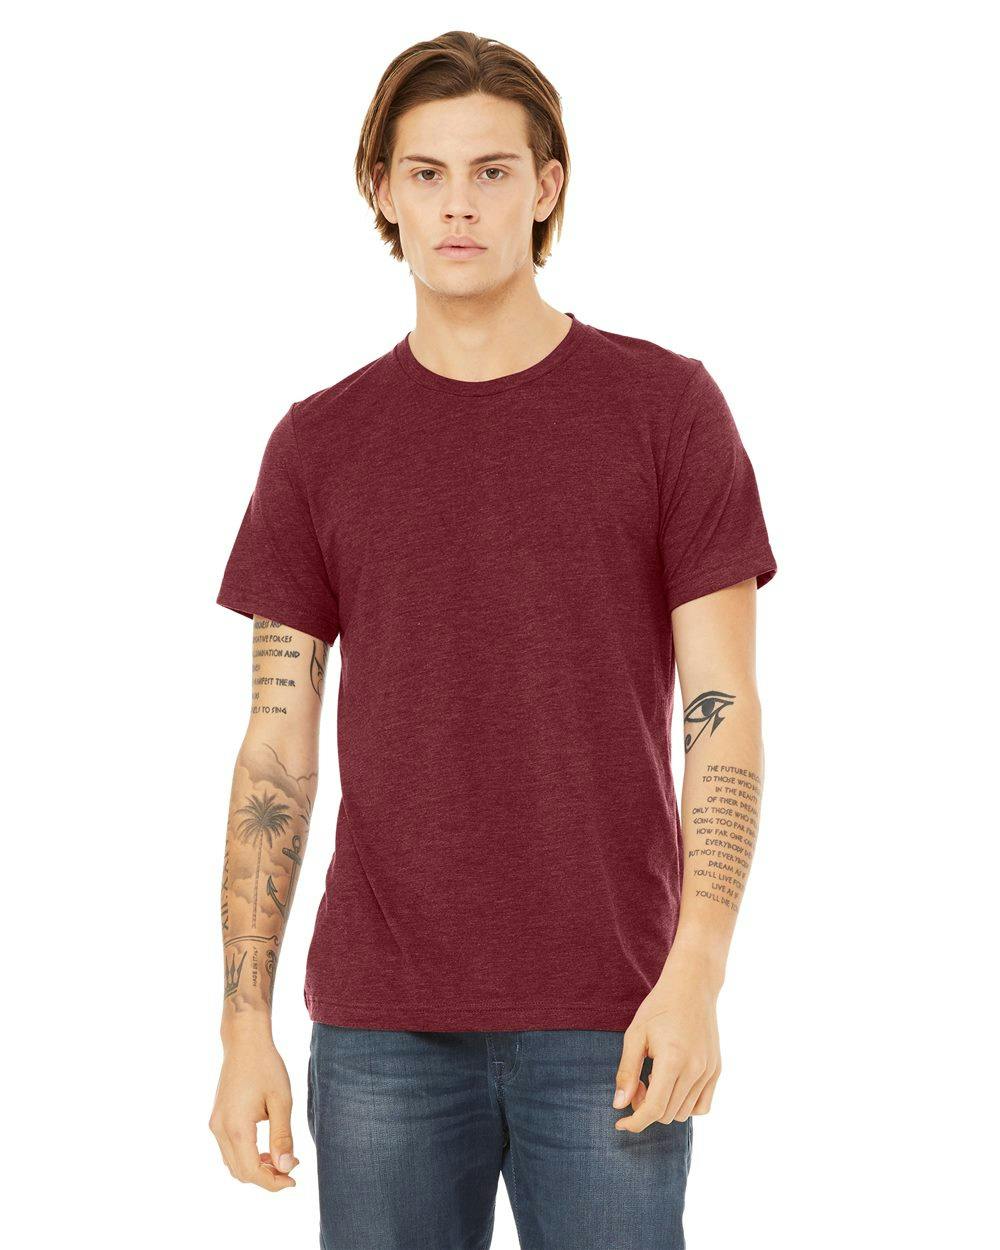 Image for Unisex Triblend Tee - 3413